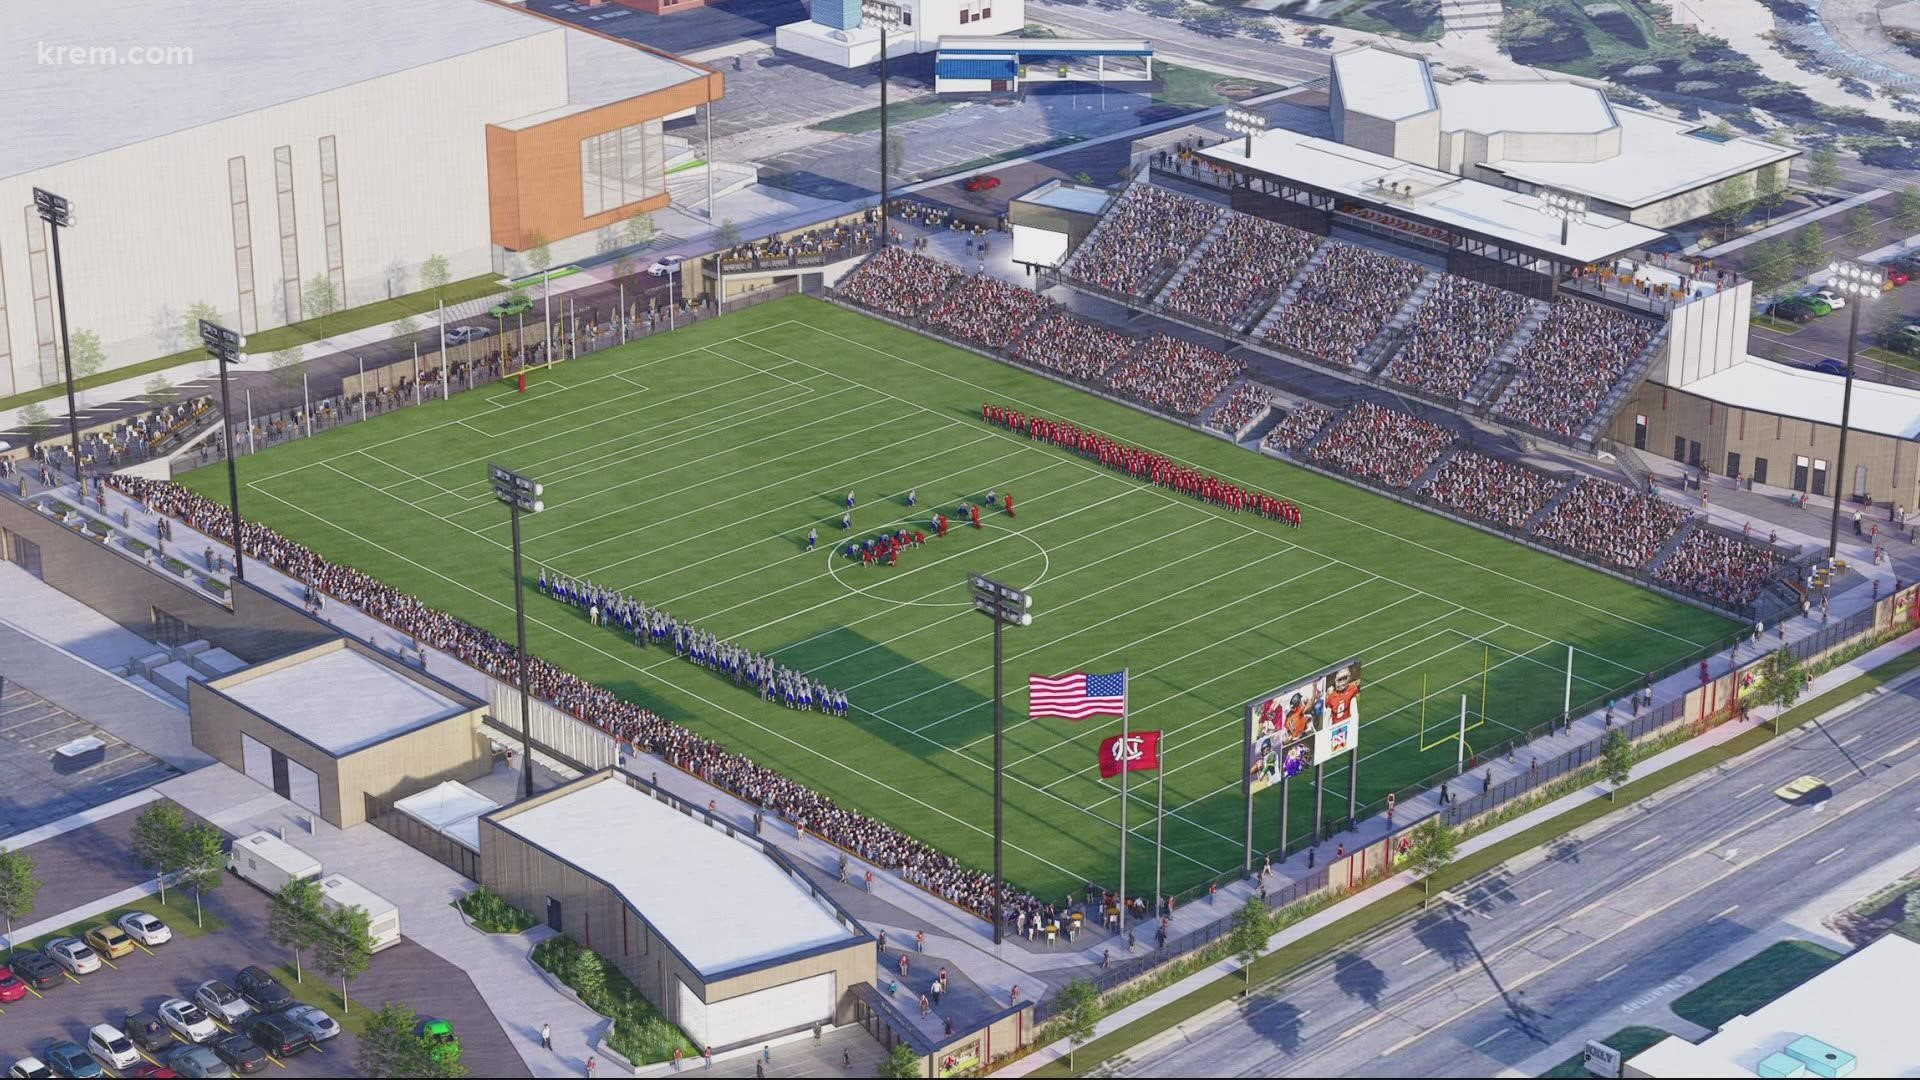 The Downtown Spokane Stadium project just broke ground a few weeks ago and will easily become the most high-tech outdoor stadium in the region.